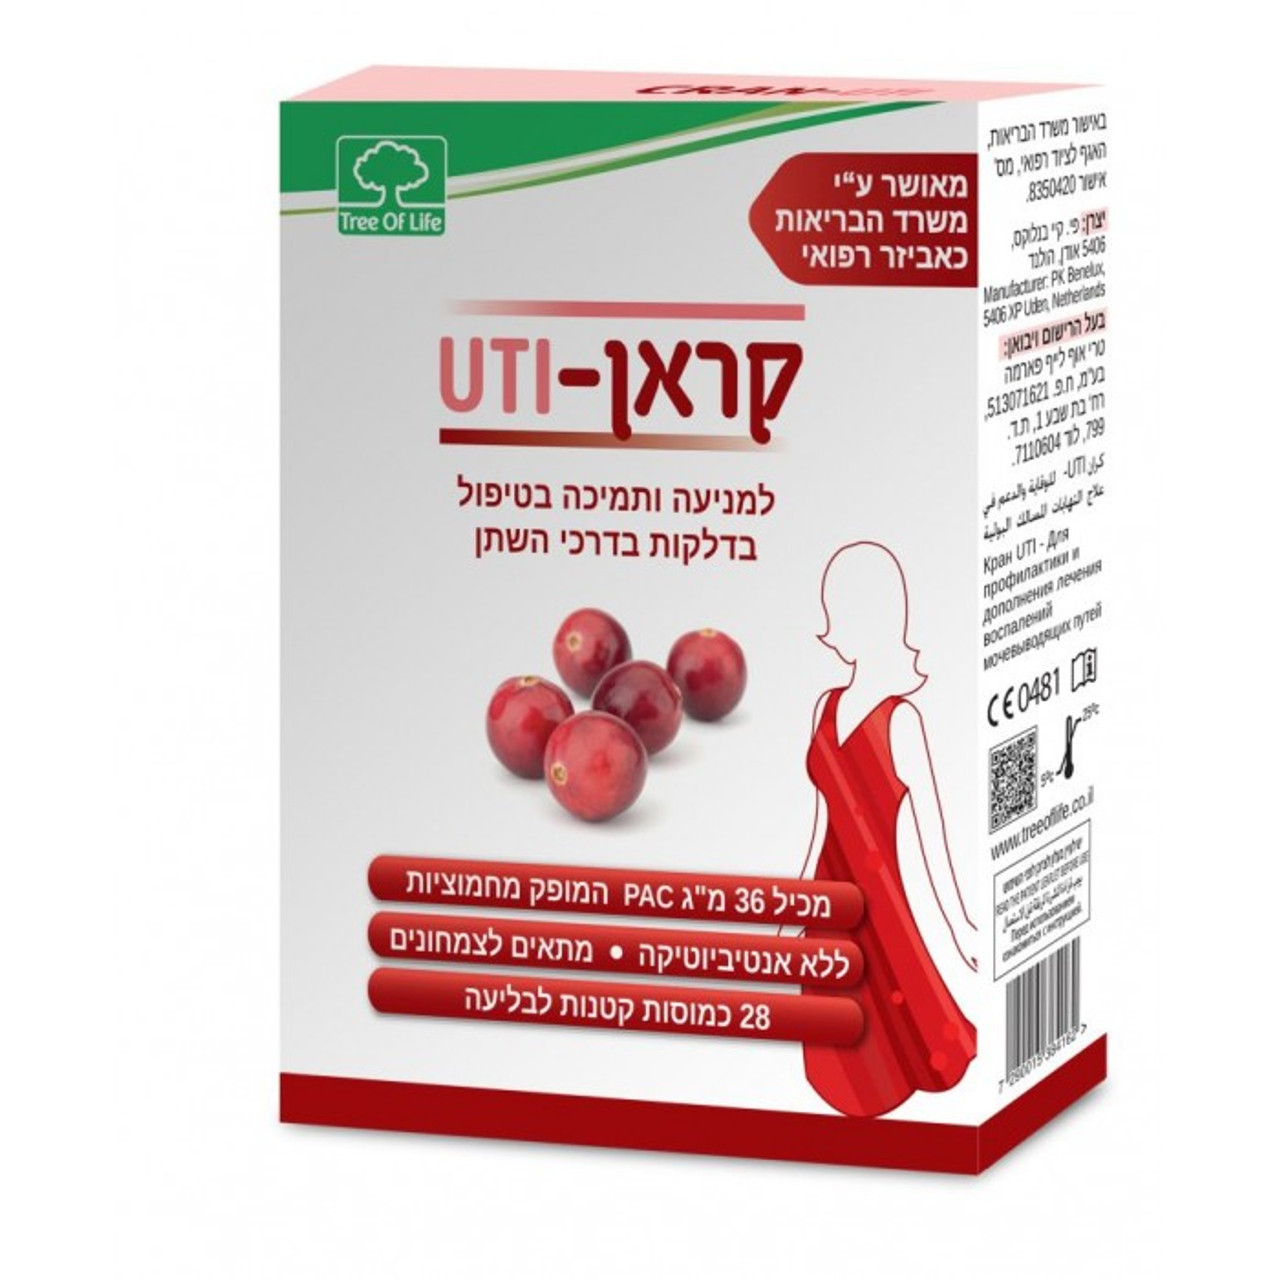 Cran Uti For Prevention And Support Of Treatment Of Urinary Tract